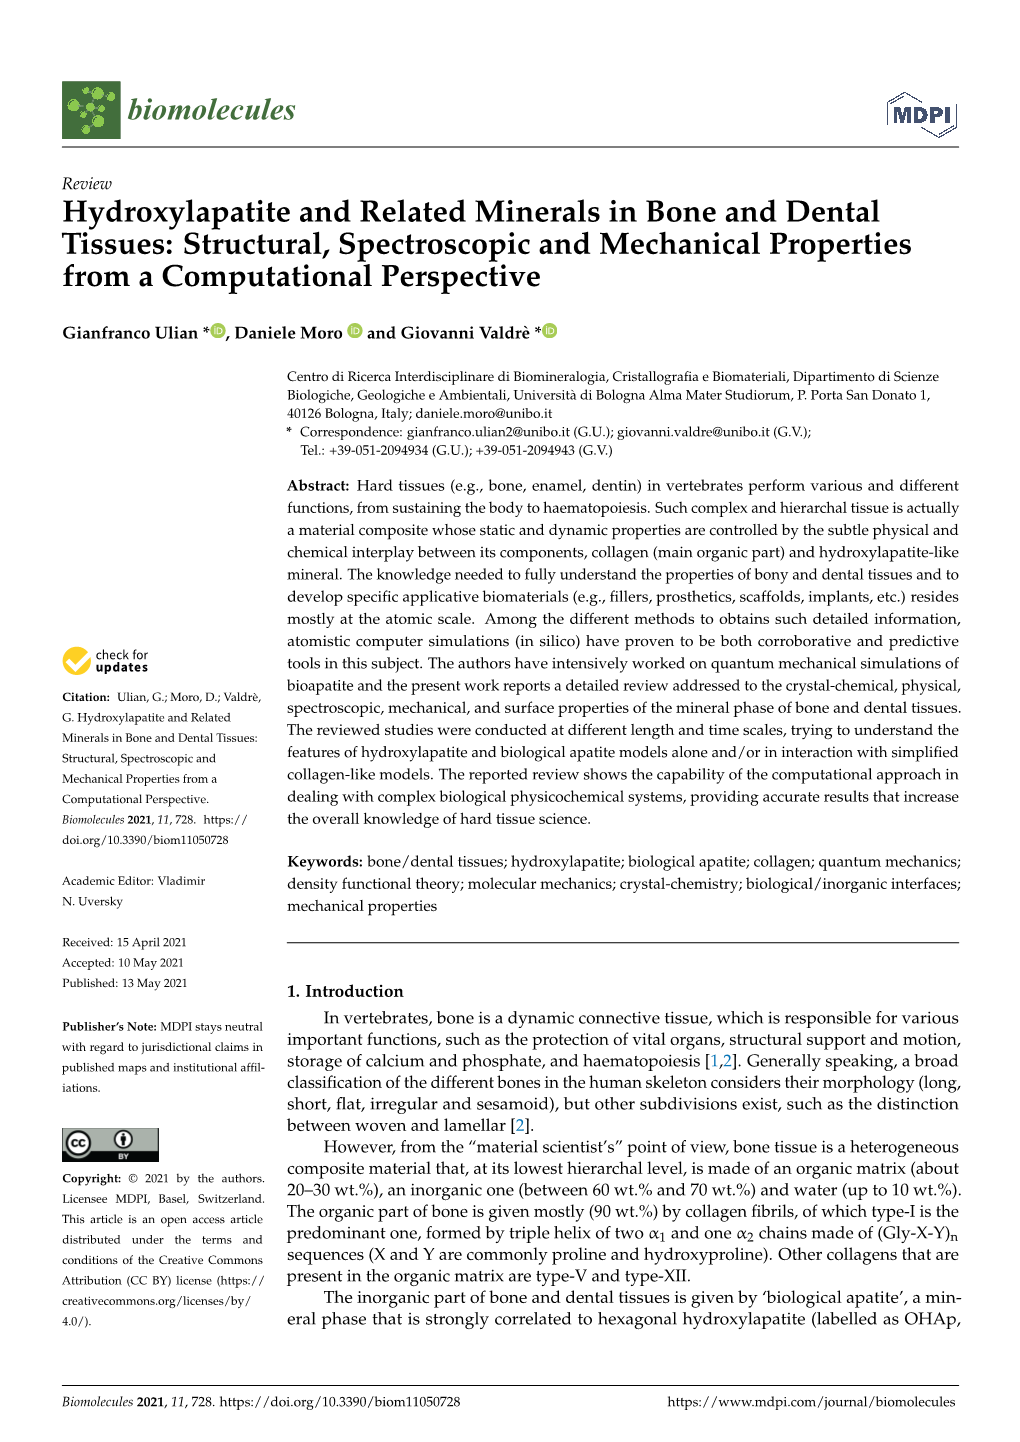 Hydroxylapatite and Related Minerals in Bone and Dental Tissues: Structural, Spectroscopic and Mechanical Properties from a Computational Perspective